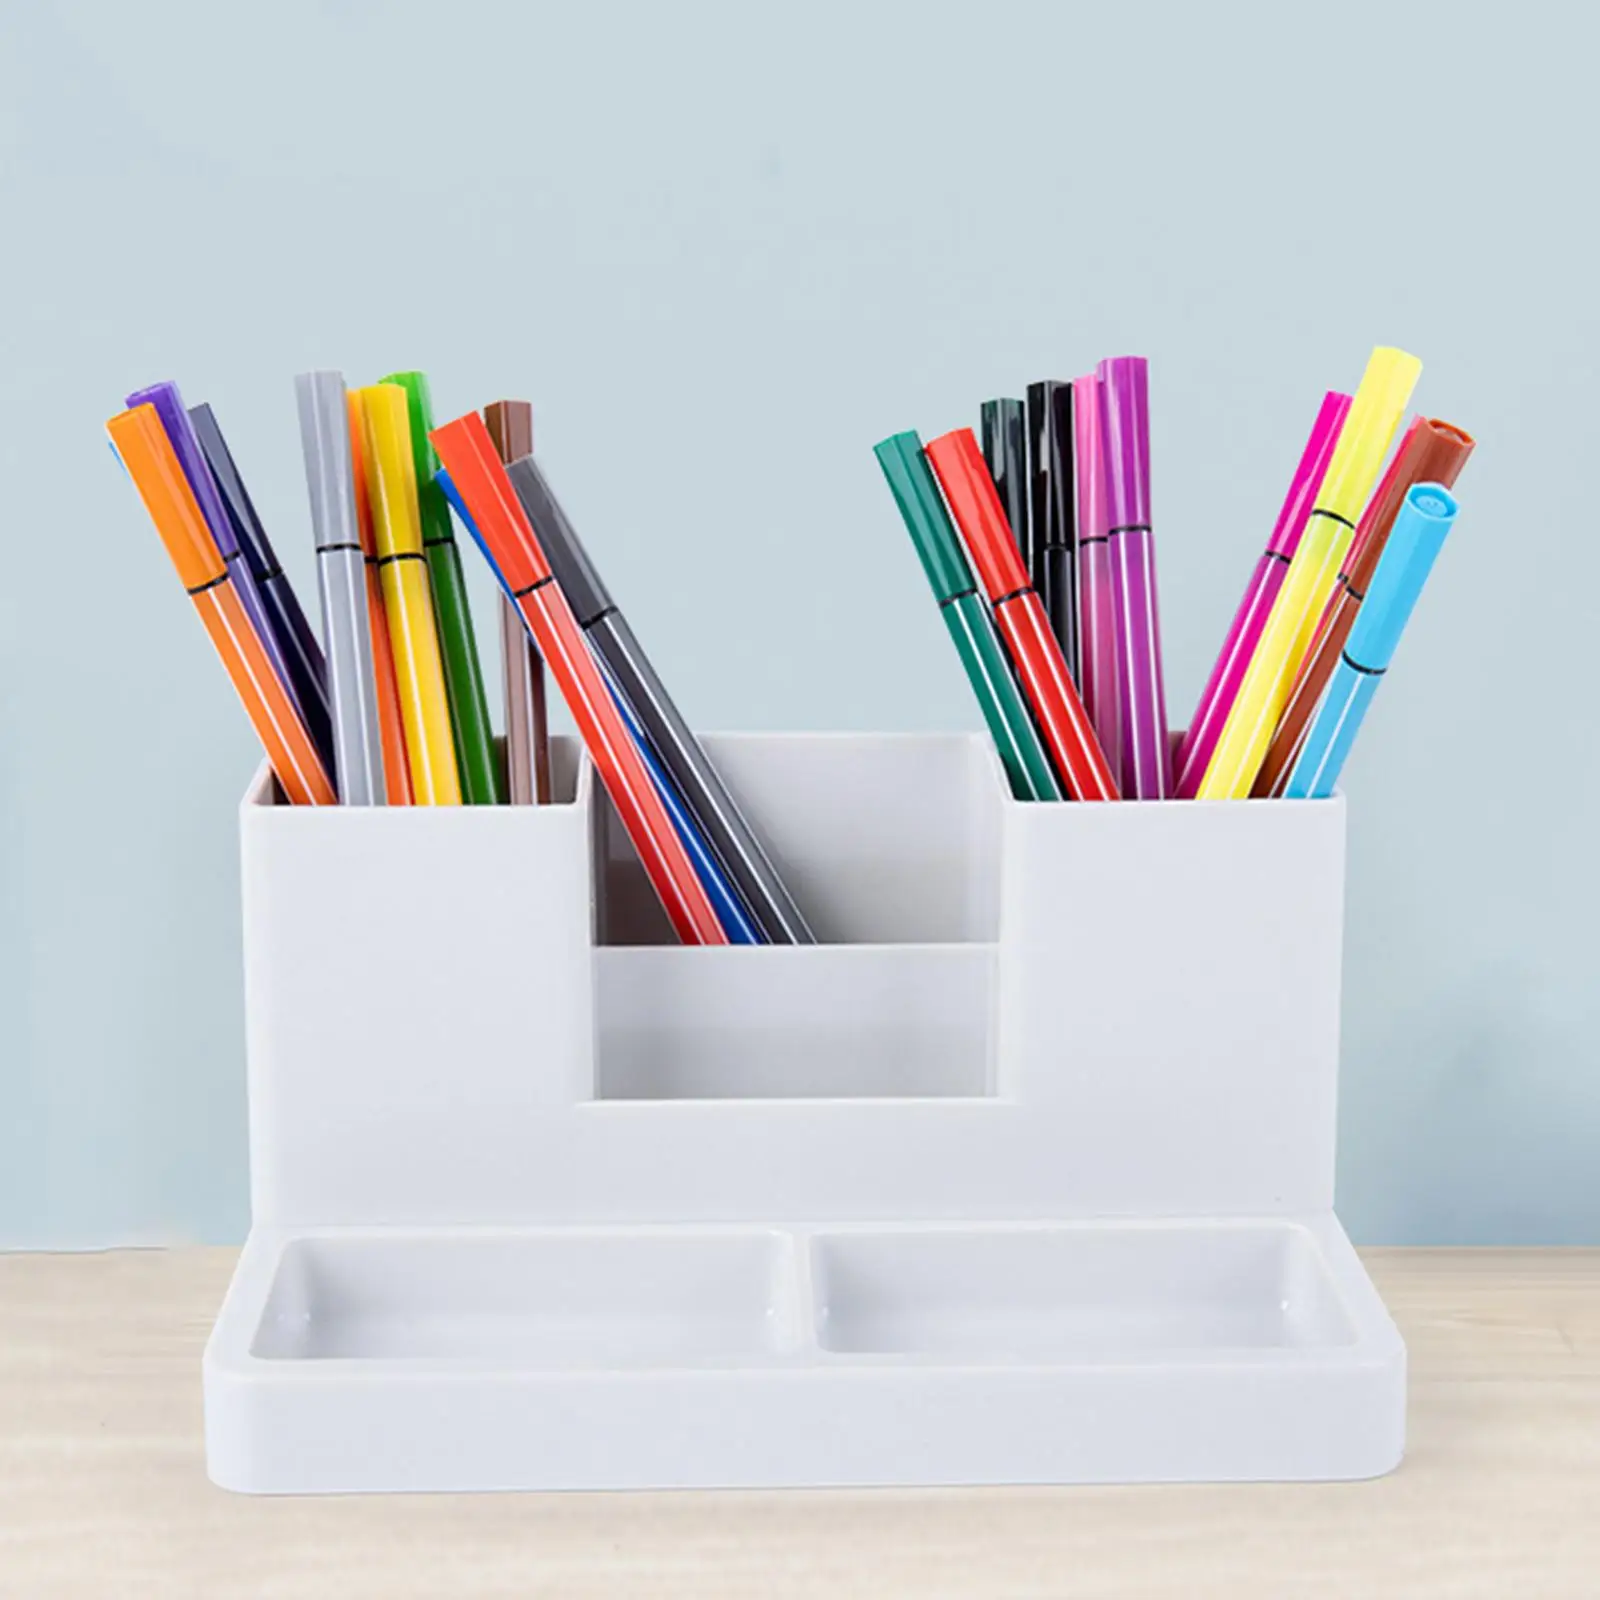 Makeup Storage Box Business Card/Pen/Pencil Holder Storage Box Case Sticky Note Tray Desktop Organizer with Pencil Holders